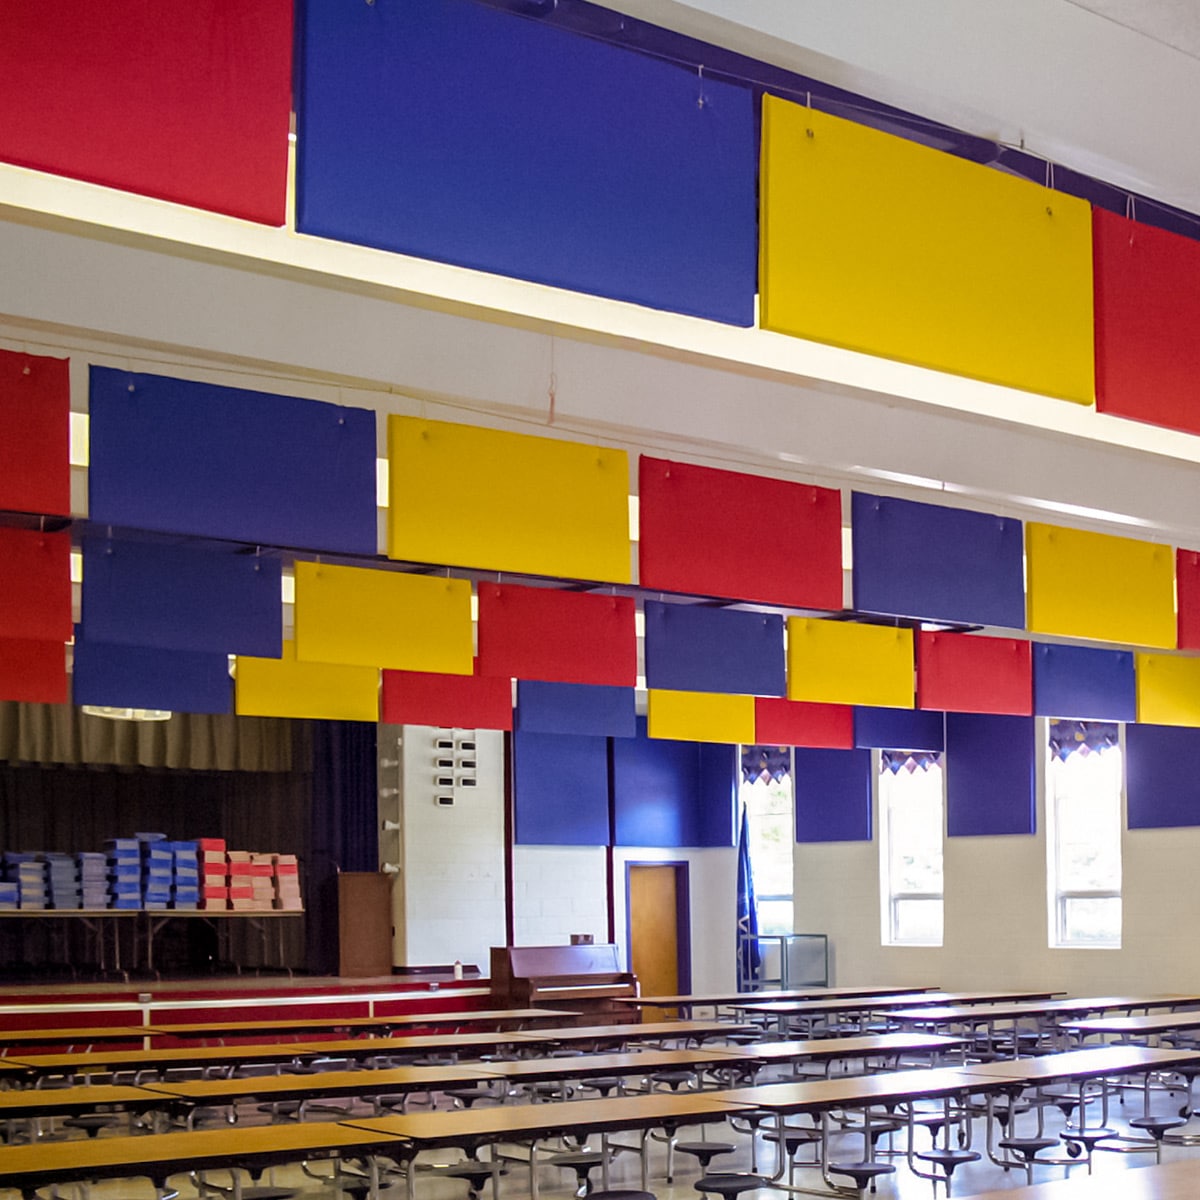 The AlphaEnviro® PVC baffles and panels provide a colorful and effective way to improve the room acoustics in this cafeteria at Mechanicsville Elementary School.